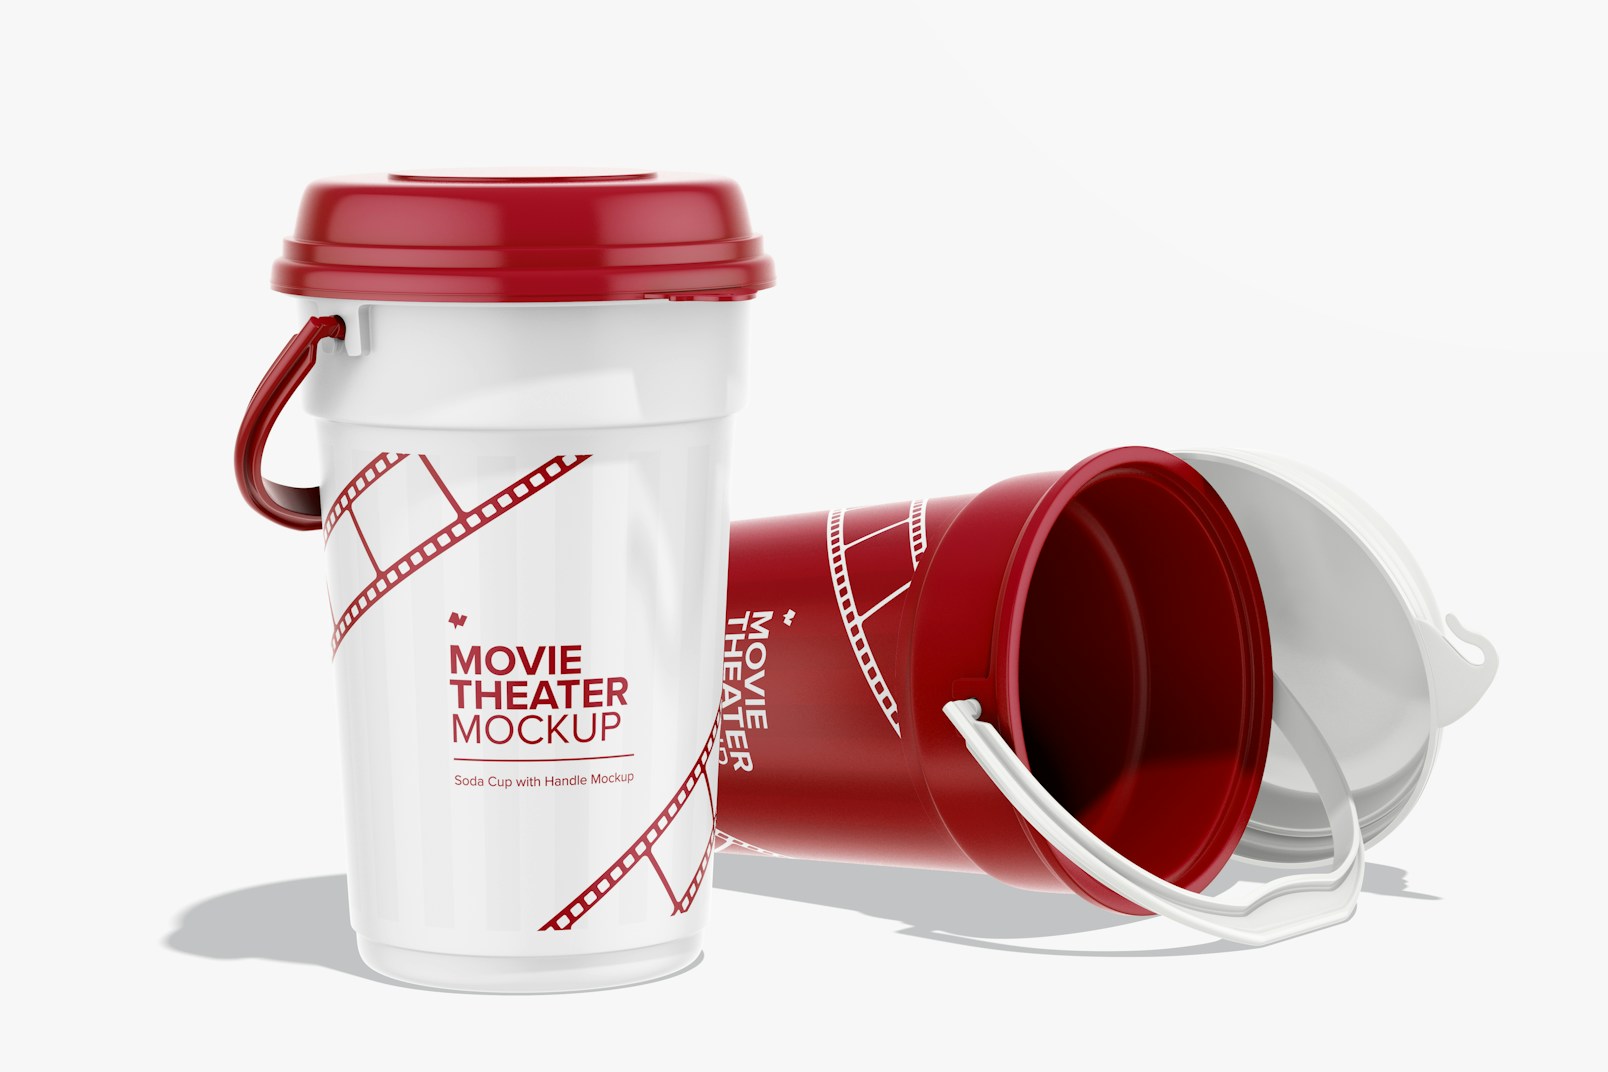 Soda Cup with Handle Mockup, Opened and Closed